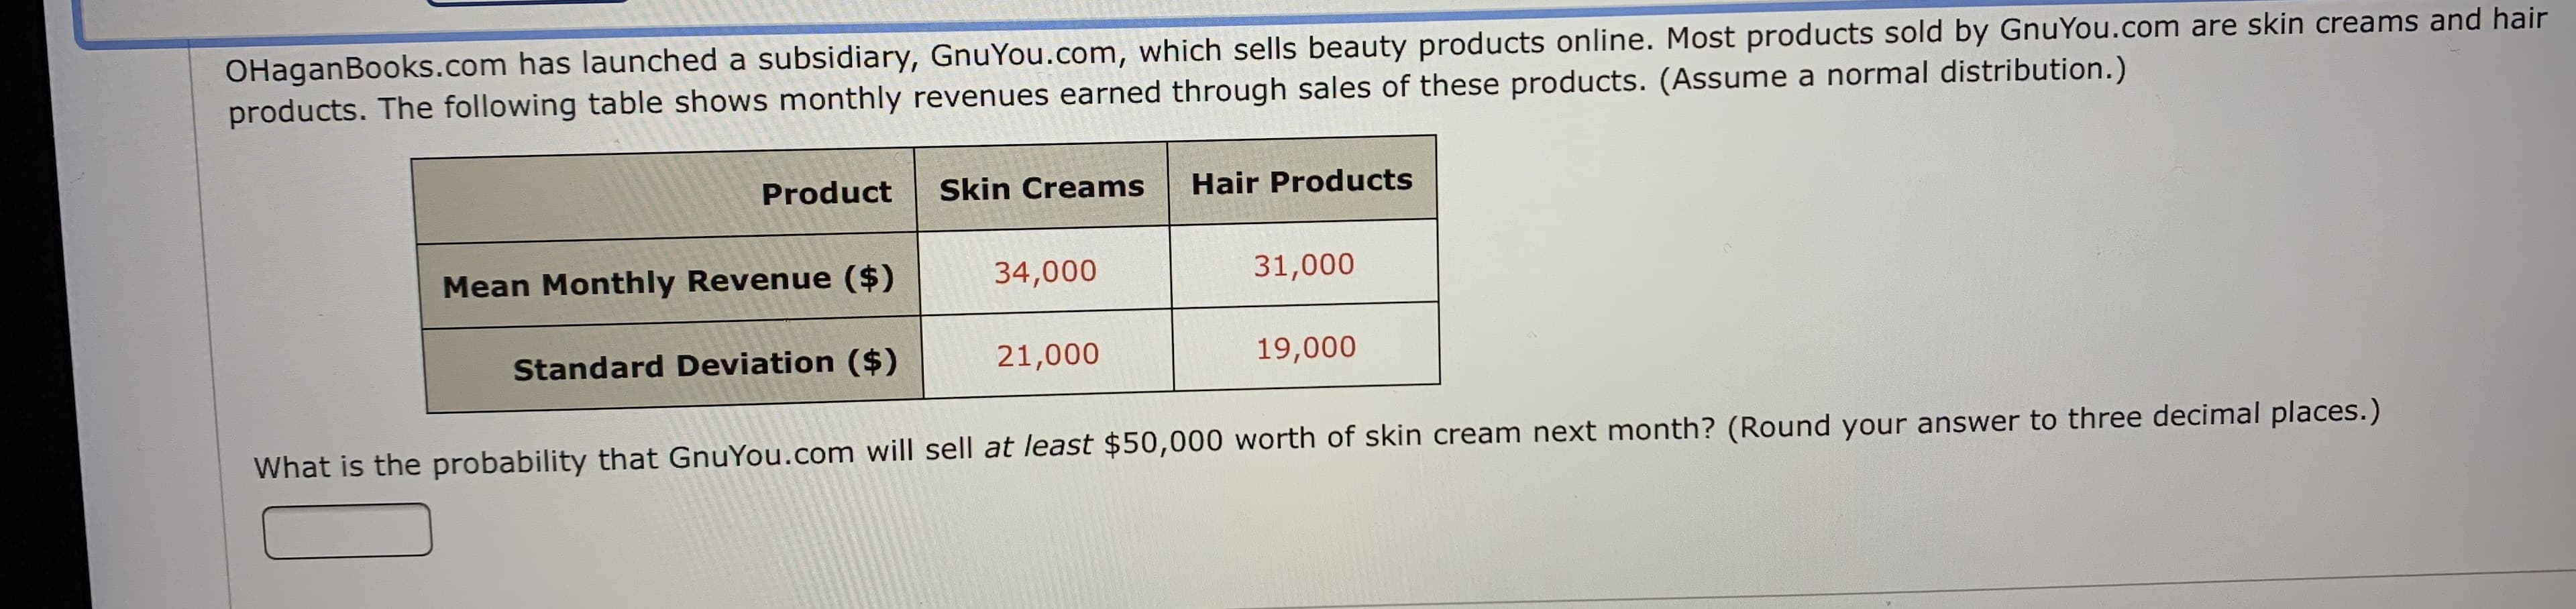 OHaganBooks.com has launched a subsidiary, GnuYou.com, which sells beauty products online. Most products sold by GnuYou.com are skin creams and hair
products. The following table shows monthly revenues earned through sales of these products. (Assume a normal distribution.)
Product
Skin Creams
Hair Products
Mean Monthly Revenue ($)
34,000
31,000
Standard Deviation ($)
21,000
19,000
What is the probability that GnuYou.com will sell at least $50,000 worth of skin cream next month? (Round your answer to three decimal places.)
